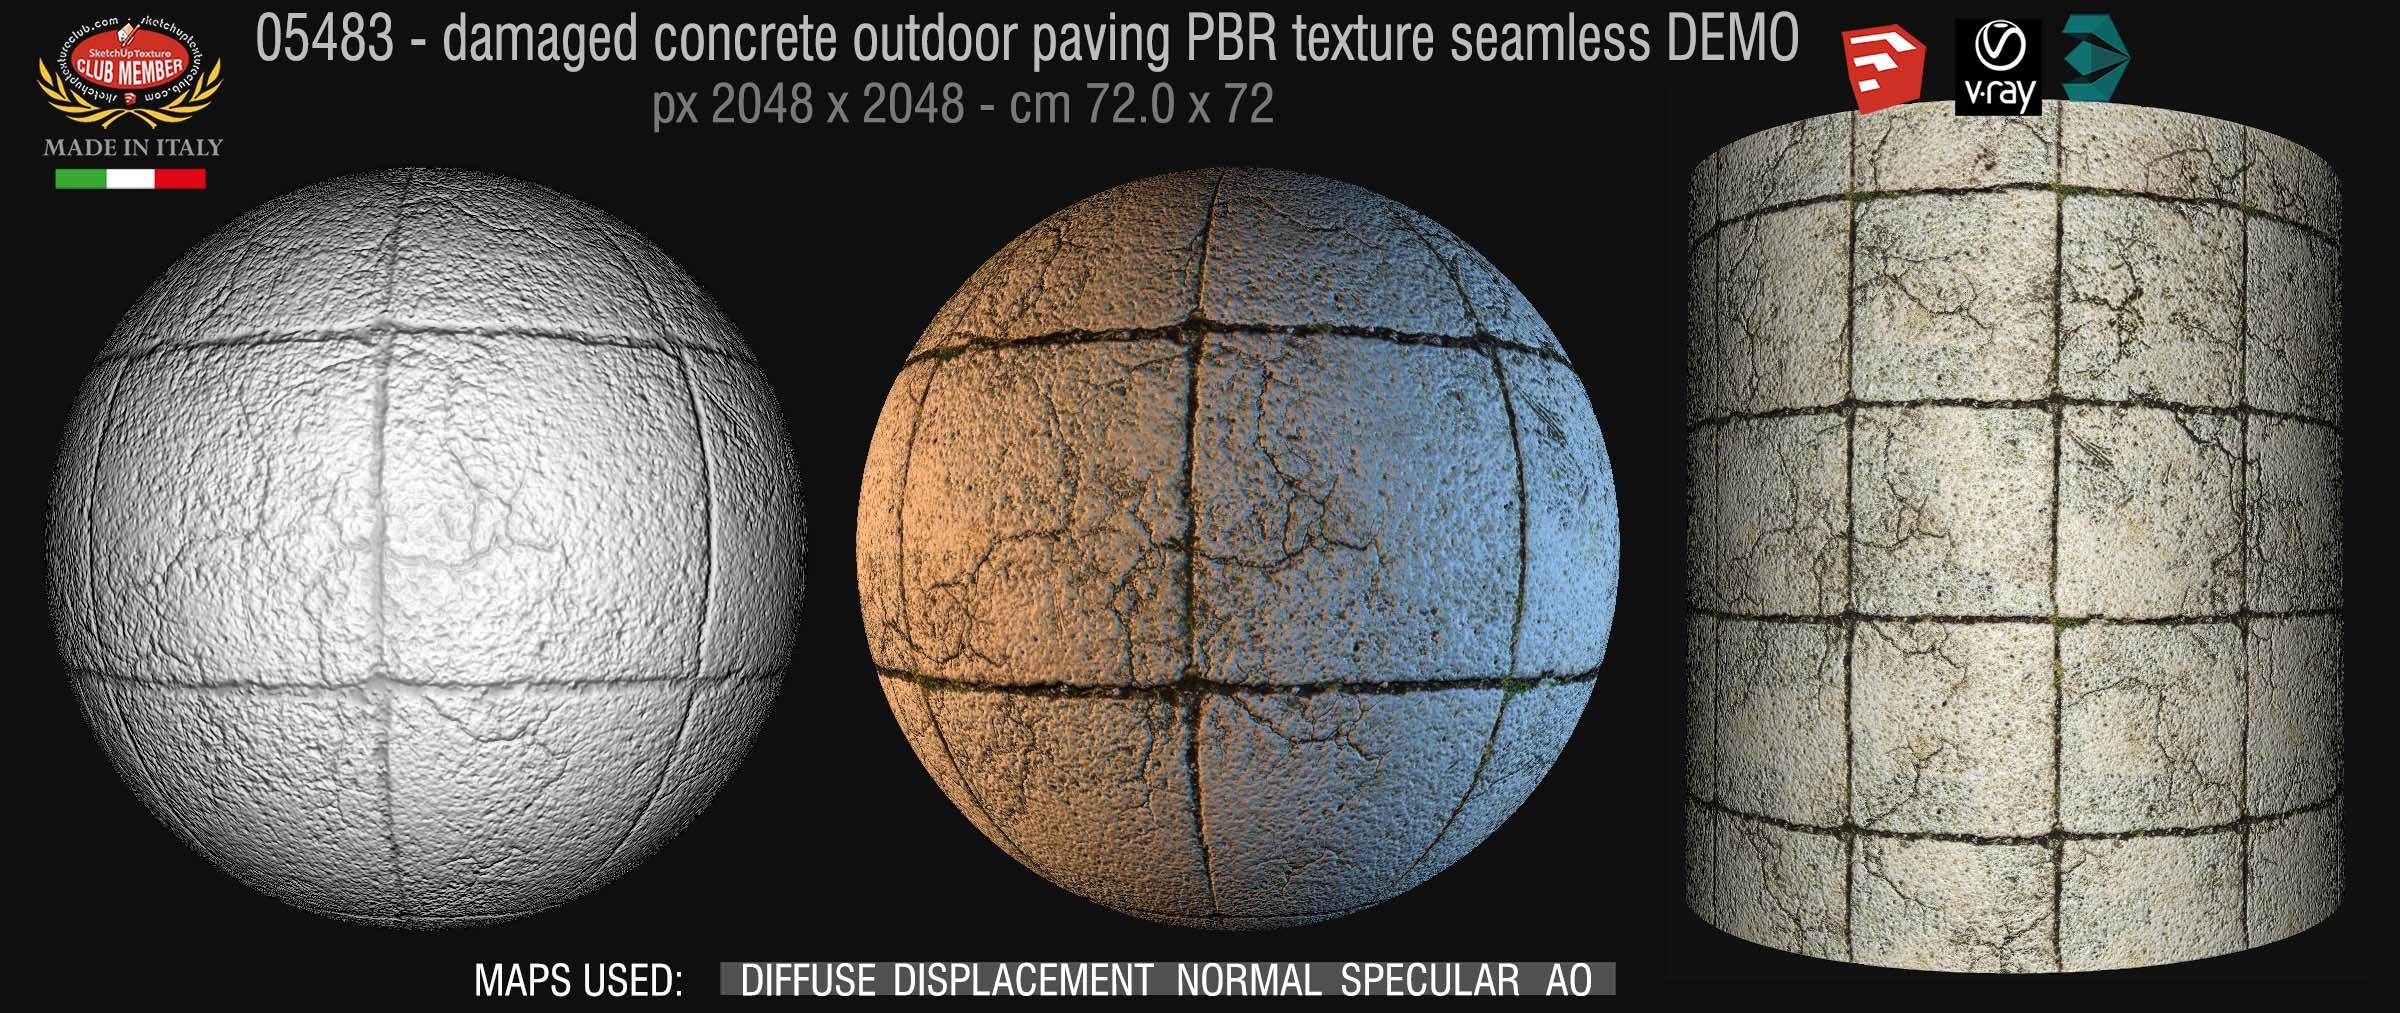 05483 Damaged concrete outdoor paving PBR texture seamless DEMO